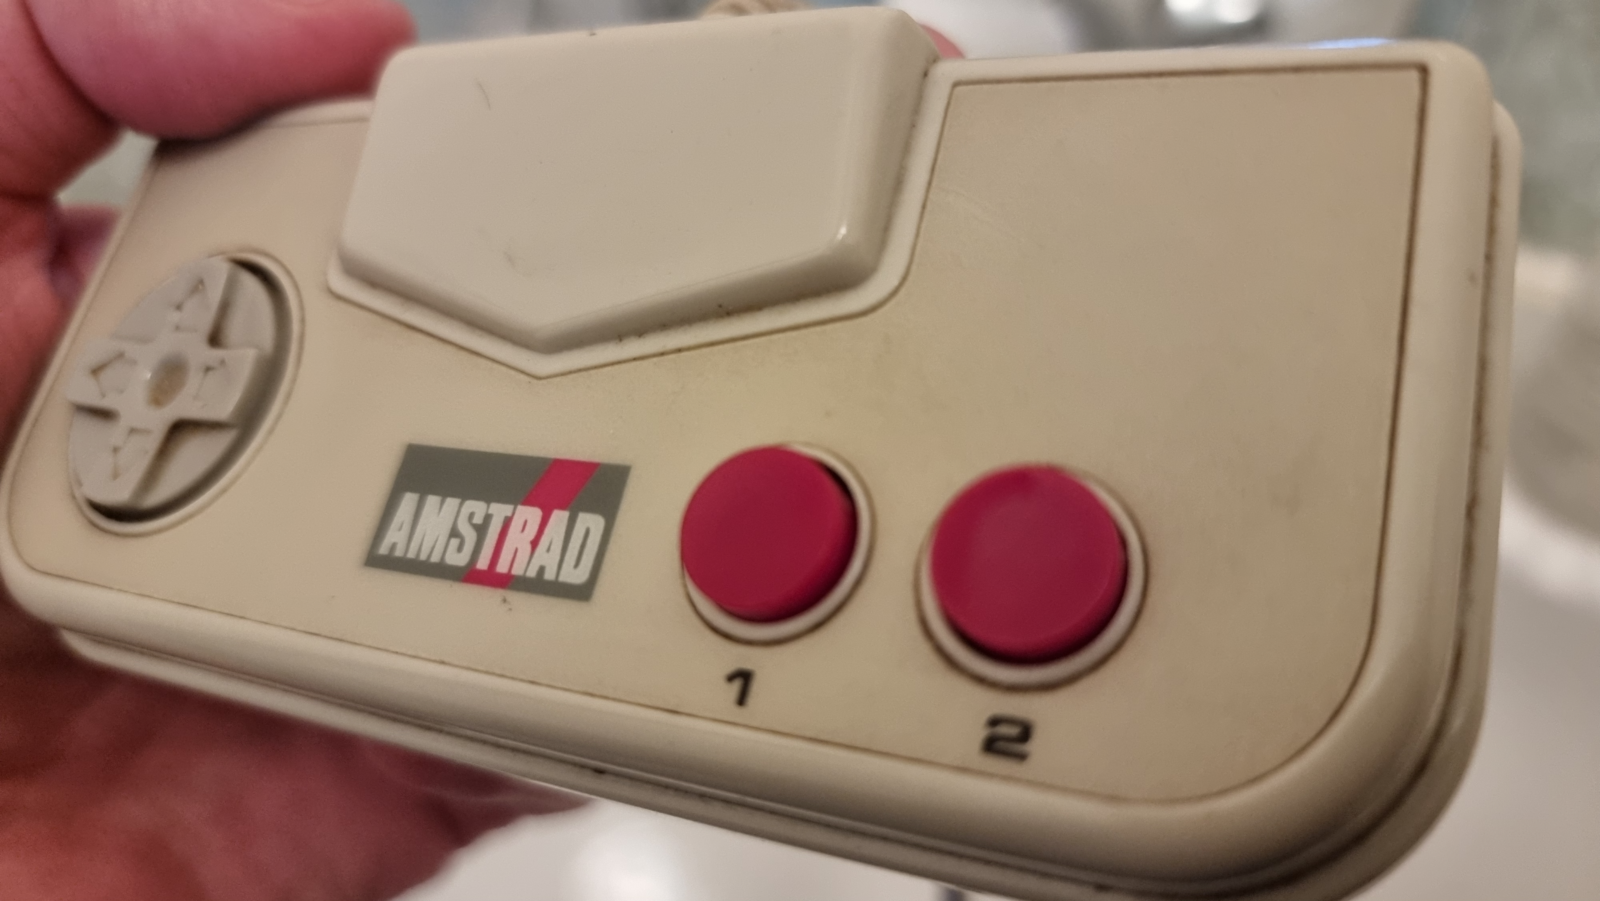 The image is a close-up of an Amstrad game controller, showing signs of wear on its beige surface. It features a directional pad on the left, two red action buttons labeled "1" and "2" on the right, and the Amstrad logo across the center.